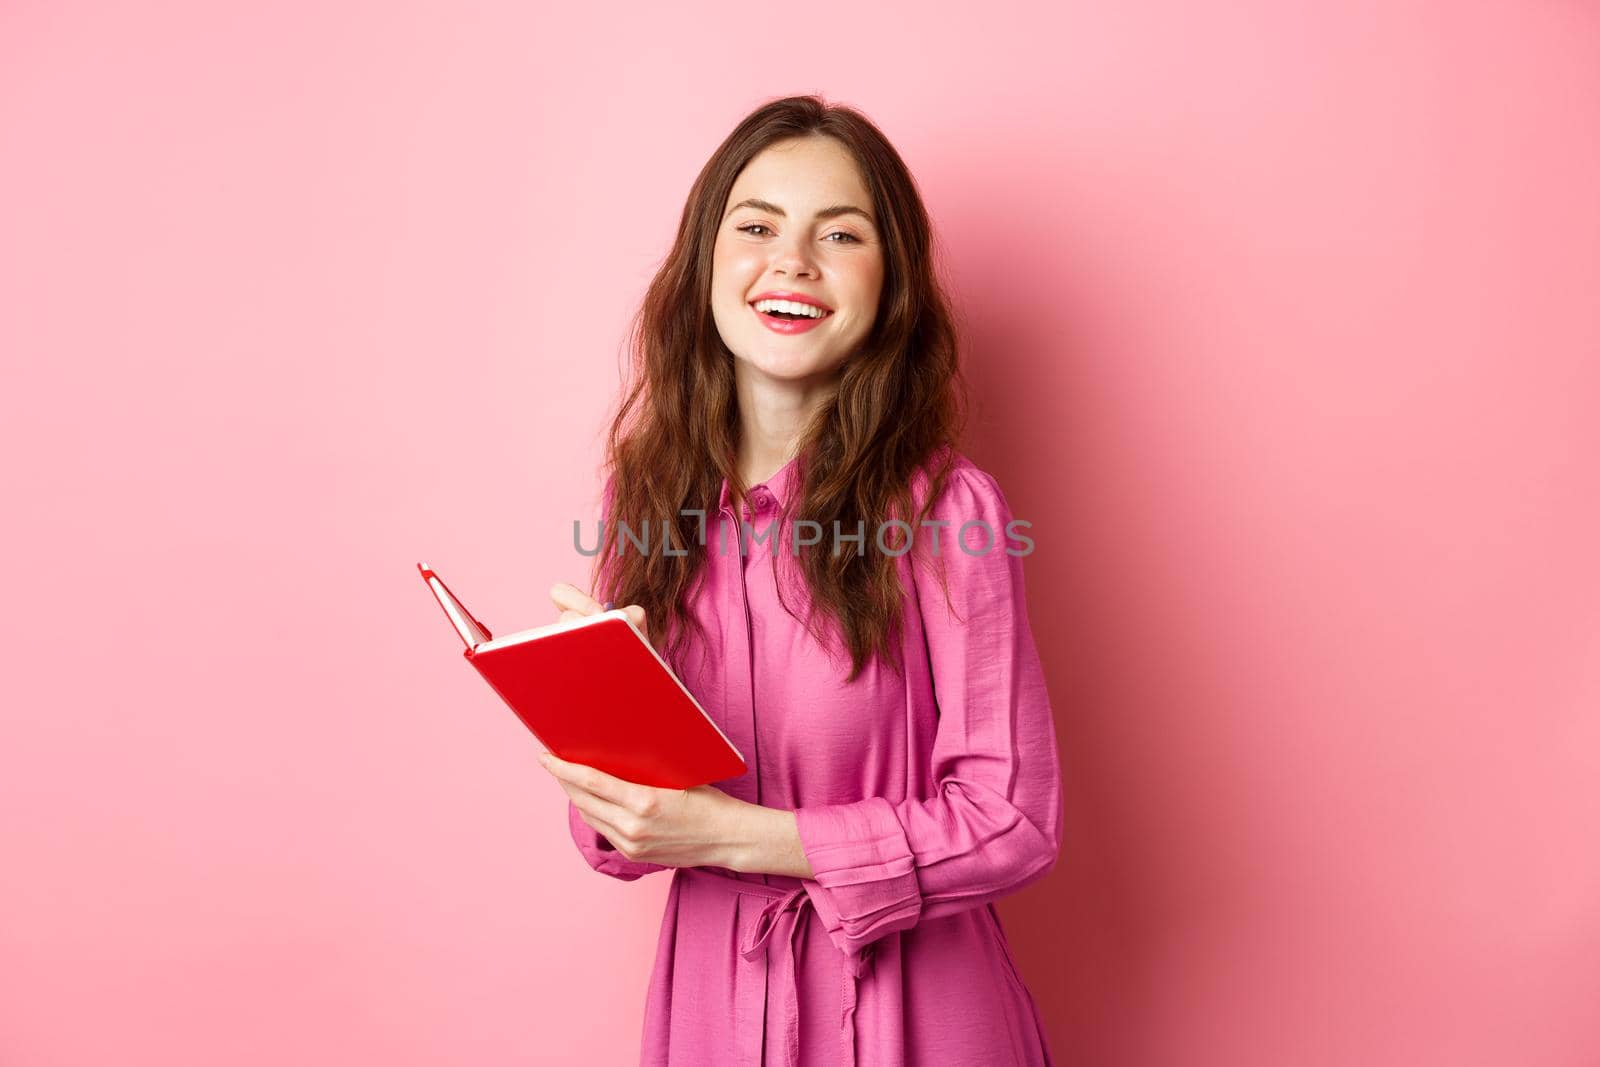 Beautiful young woman smiling, writing in notebook, holding planner or diary, standing against pink background.